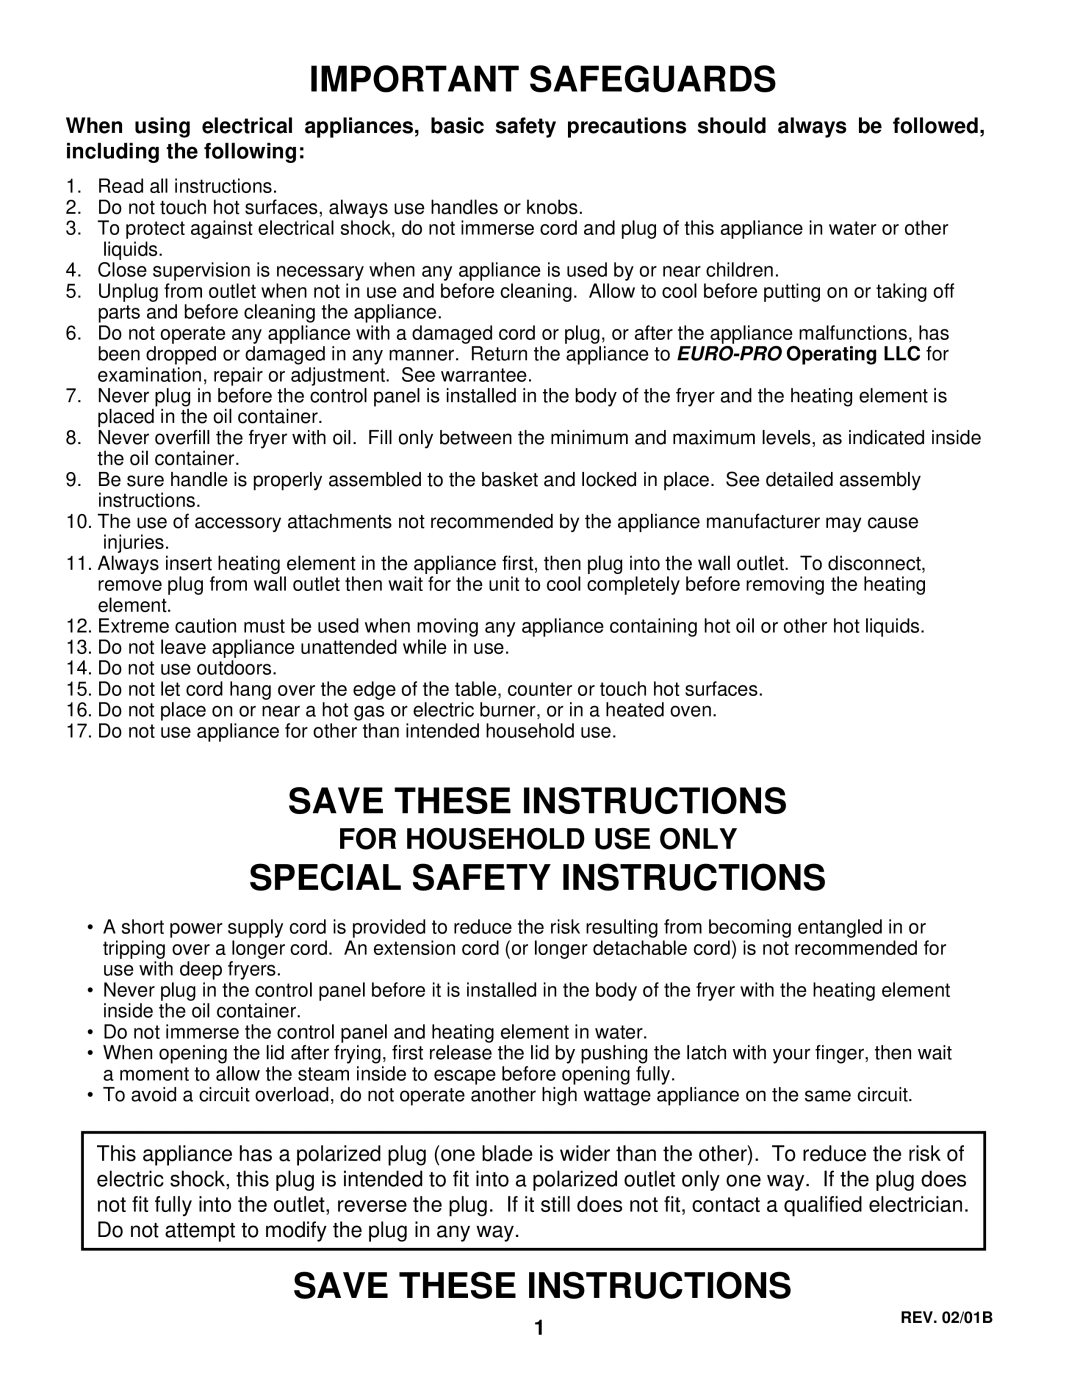 Bravetti EP65 manual For Household Use Only, Important Safeguards, Save These Instructions, Special Safety Instructions 